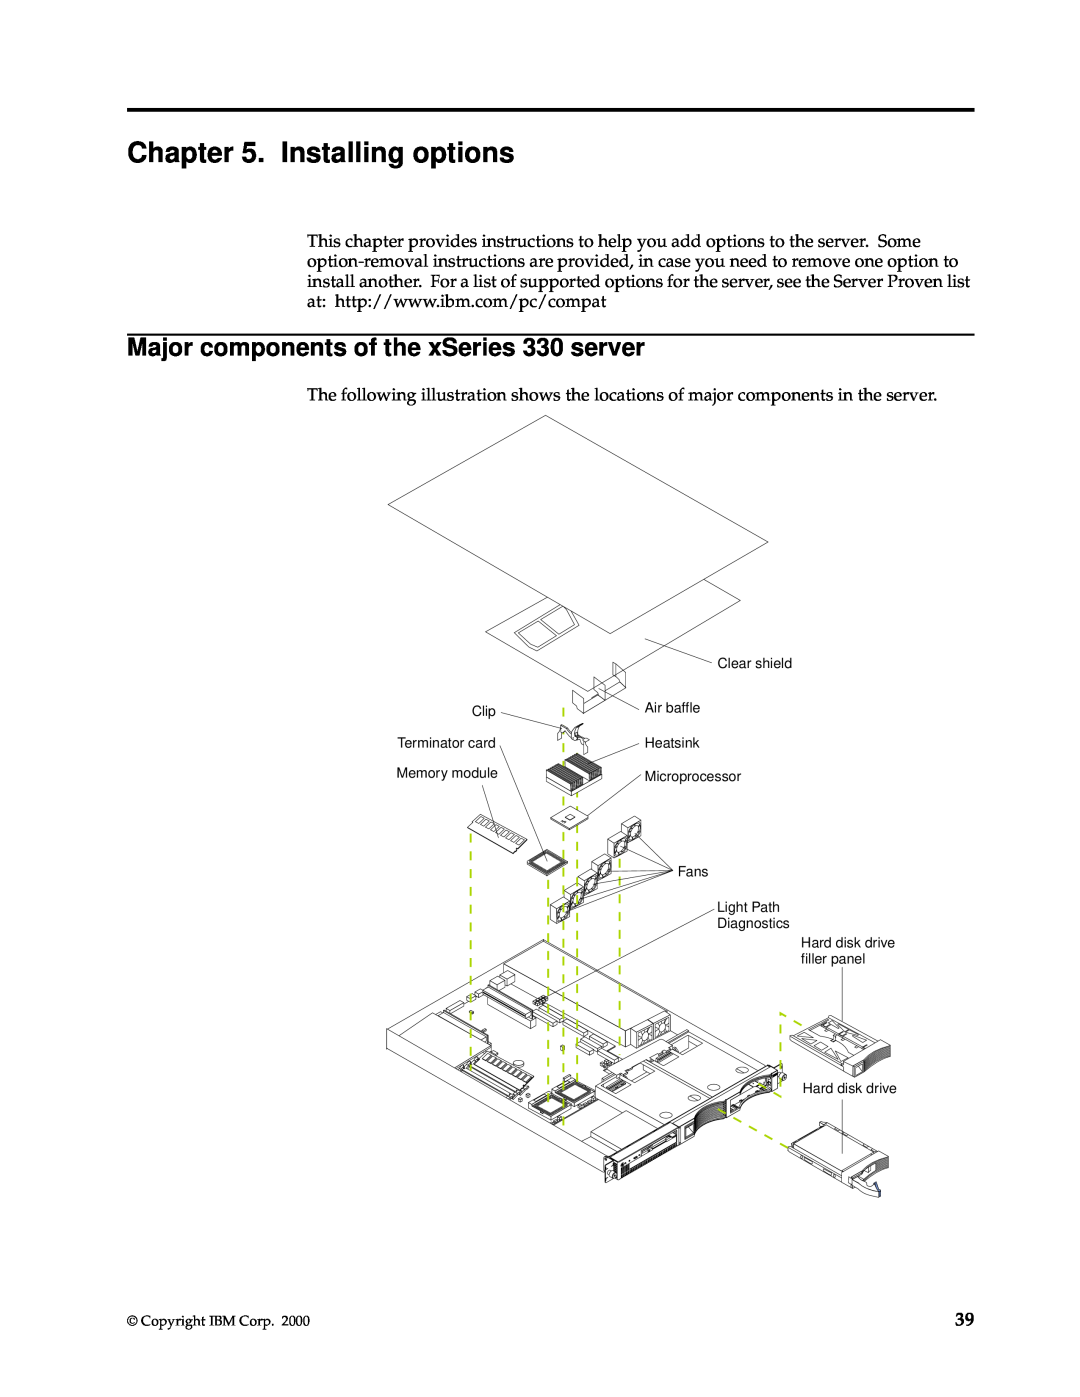 IBM manual Installing options, Major components of the xSeries 330 server 